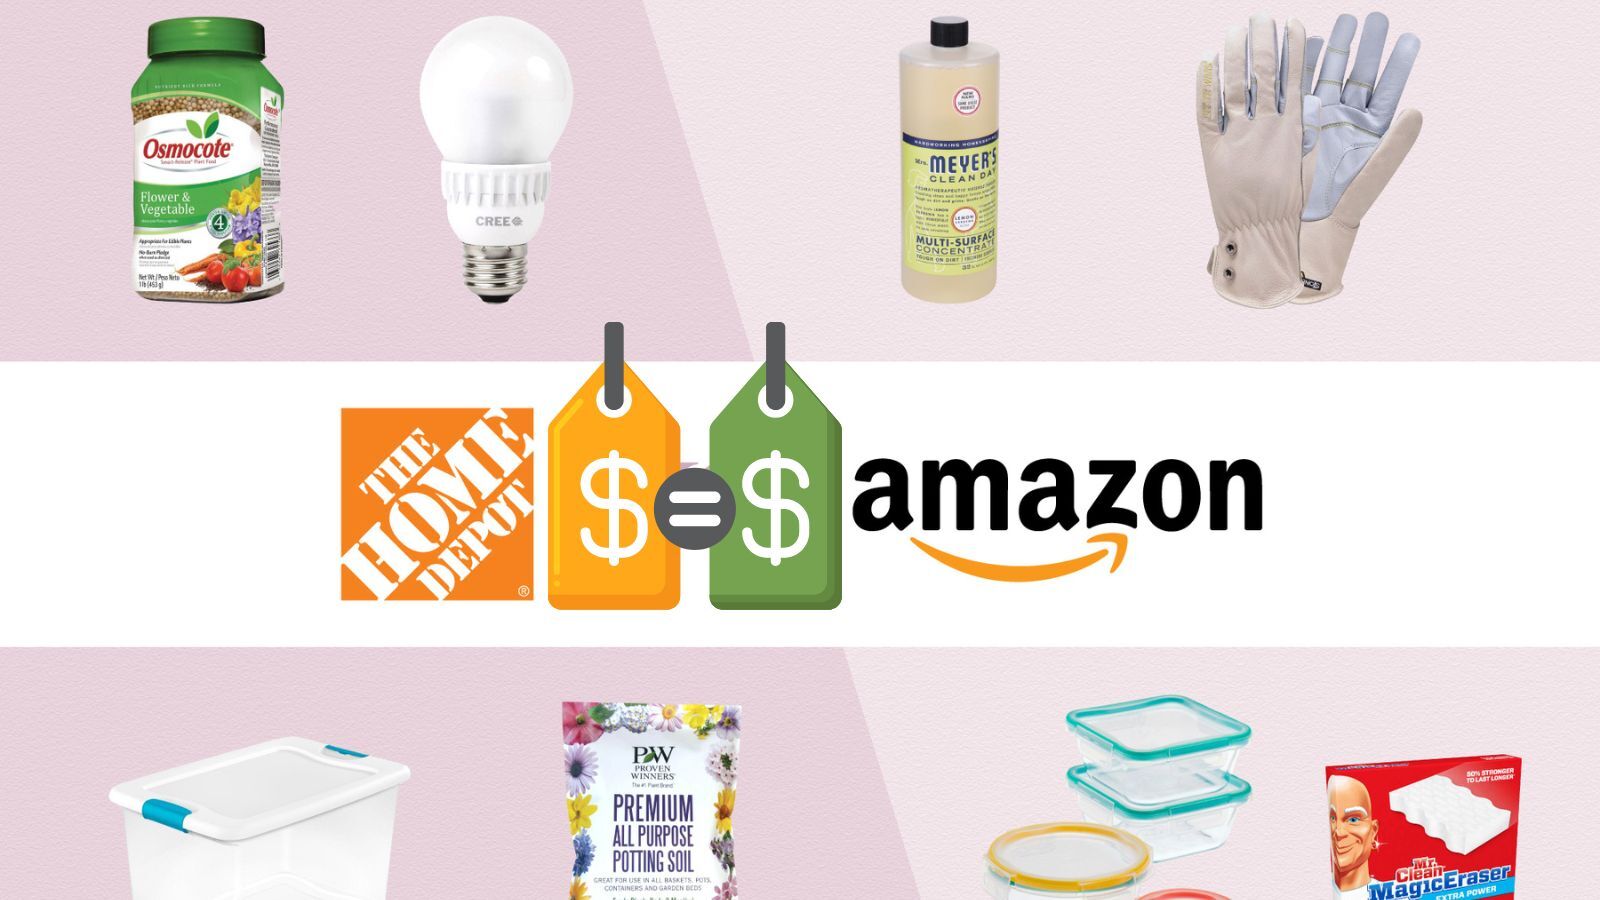 Does Home Depot Price Match Amazon? (All You Need to Know)